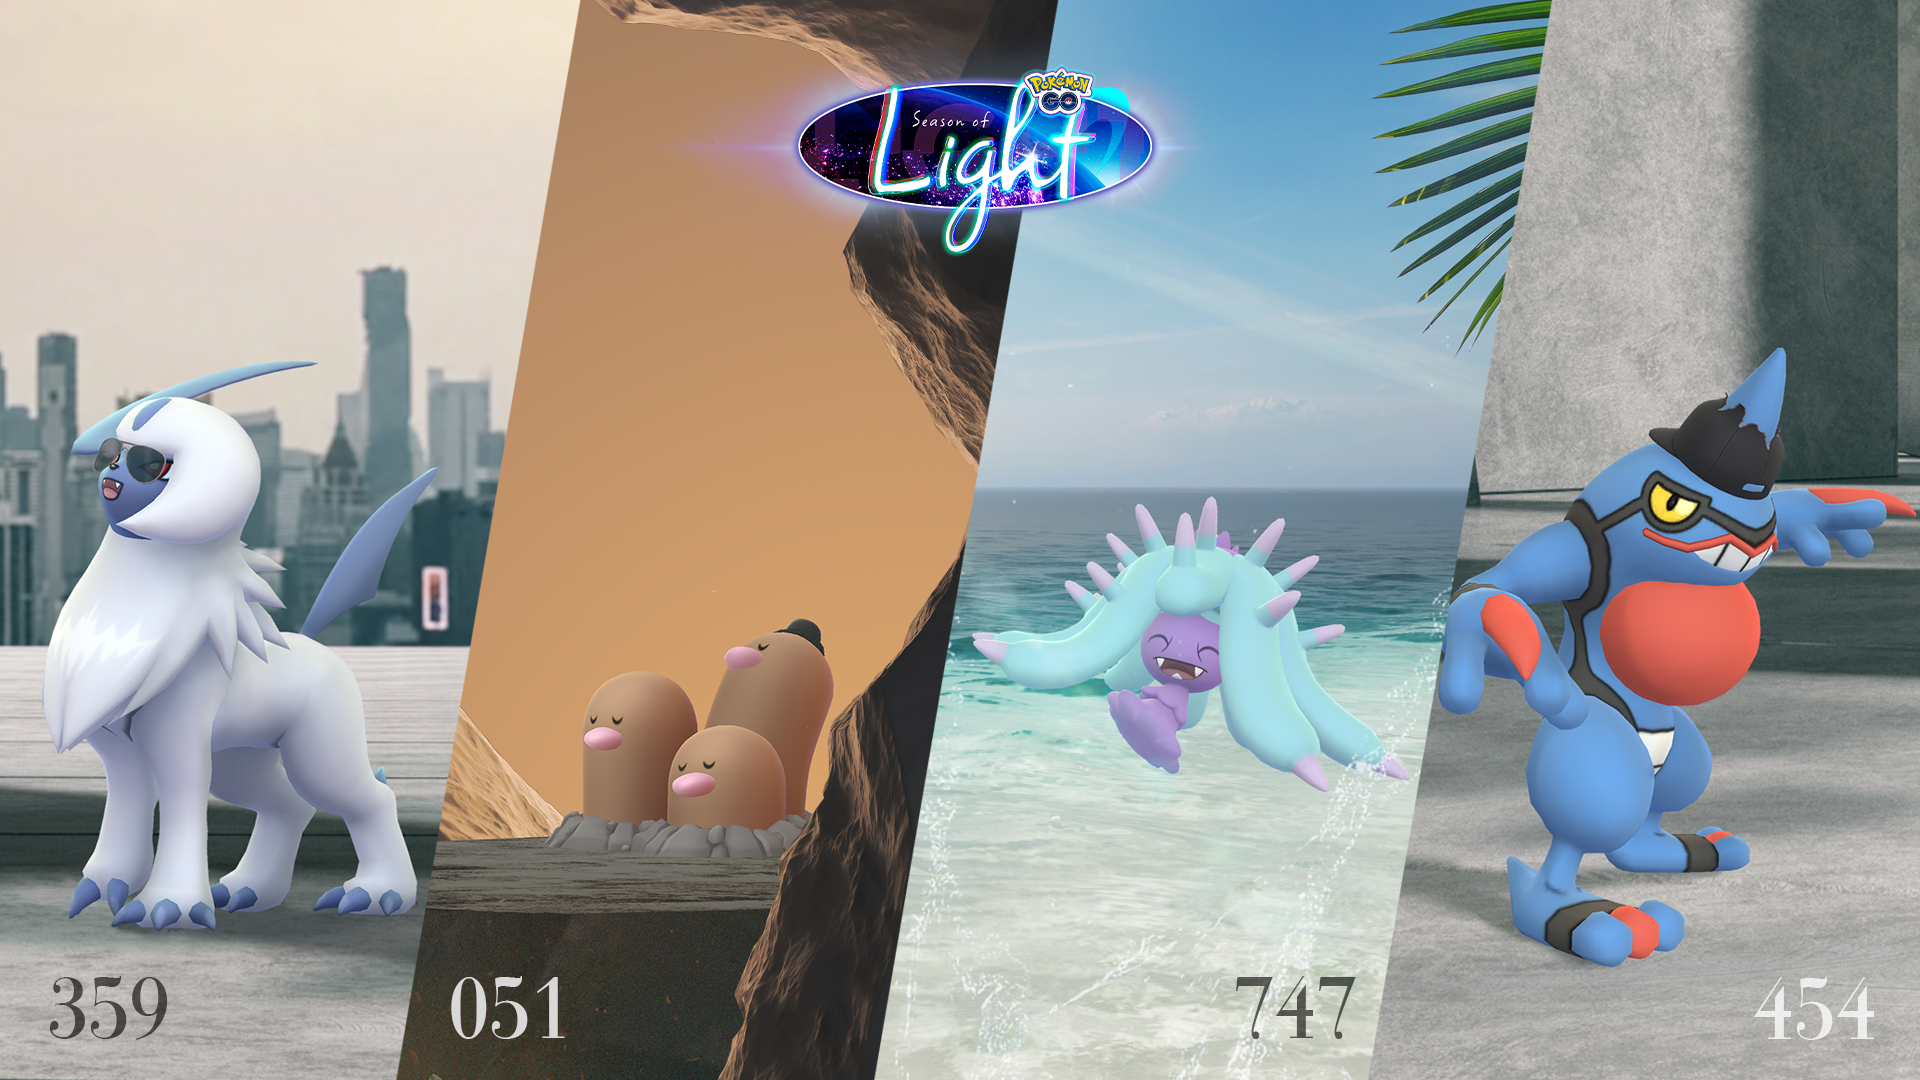 Strut in style with Mareanie, Toxapex, and newly costumed Pokémon during Fashion Week!
